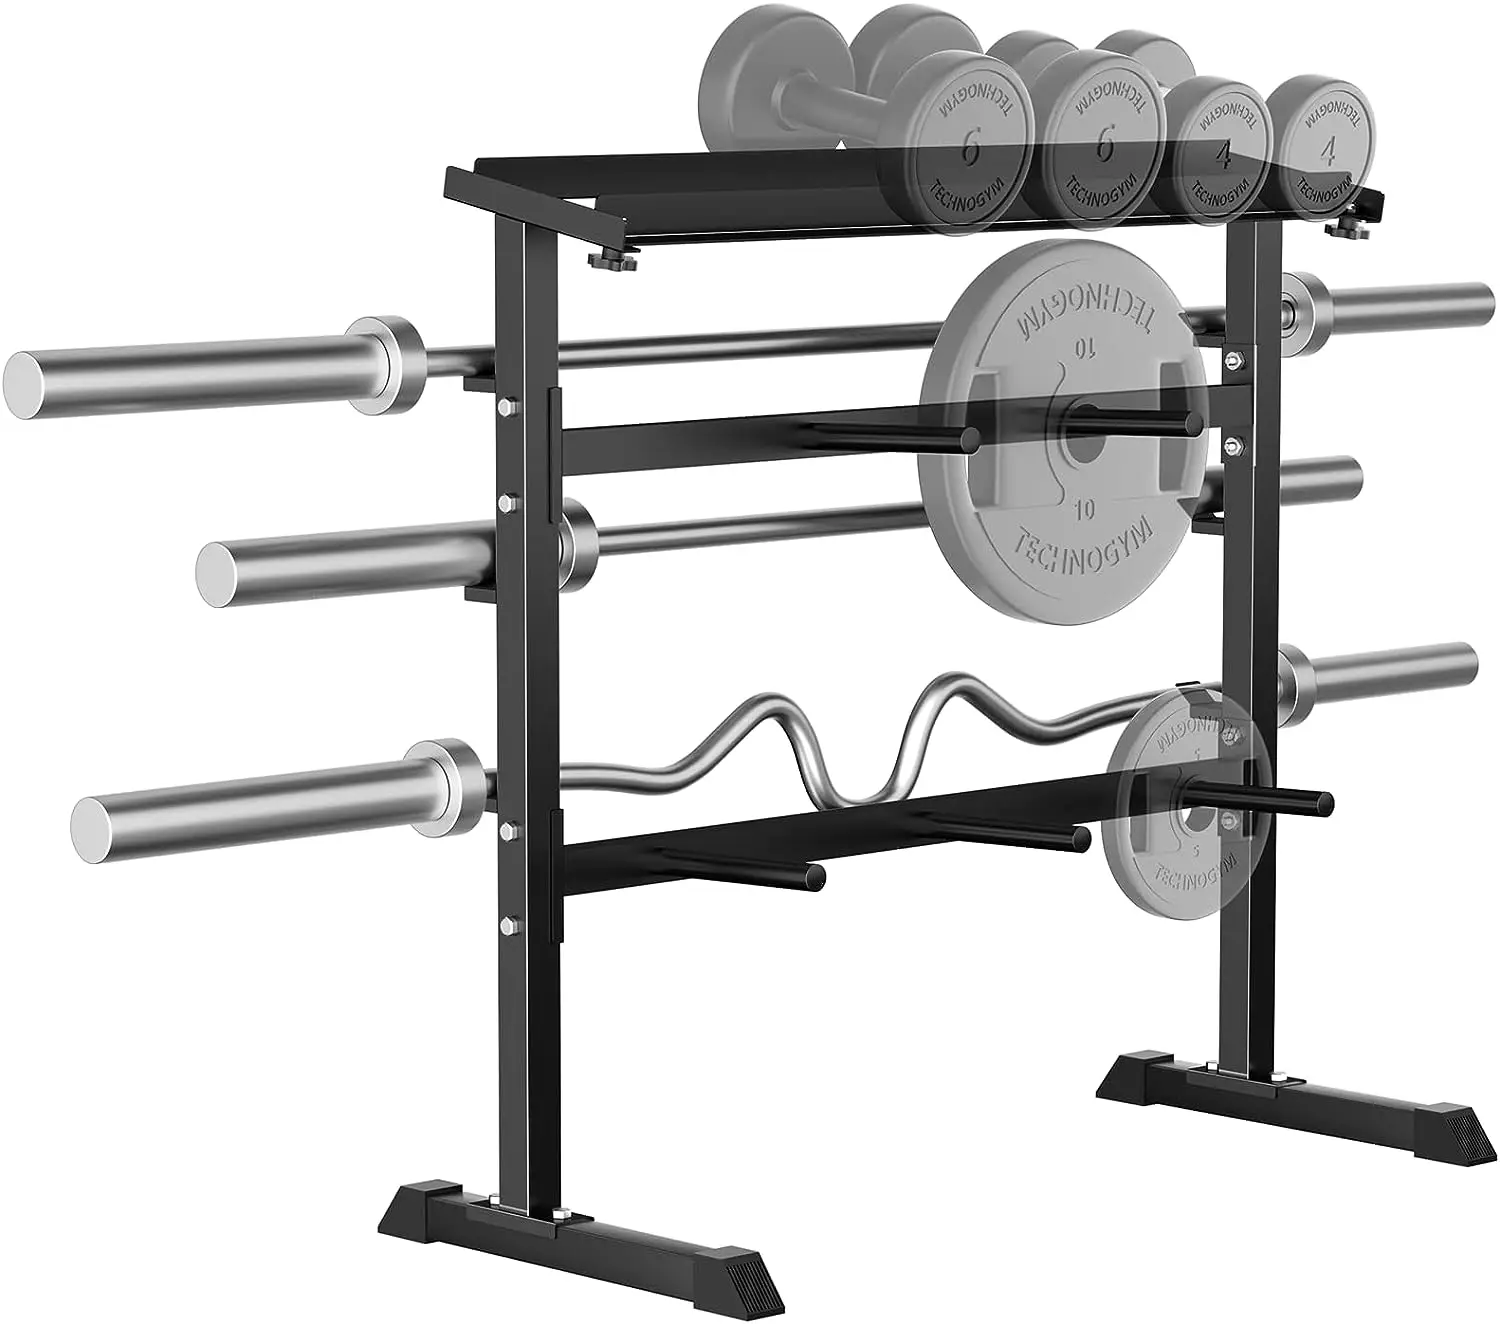 

Dumbbell Stand Barbell Weight for Dumbbells, Barbell , Weight Plates - Weight Storage for Strength Training Home Gym Fitn